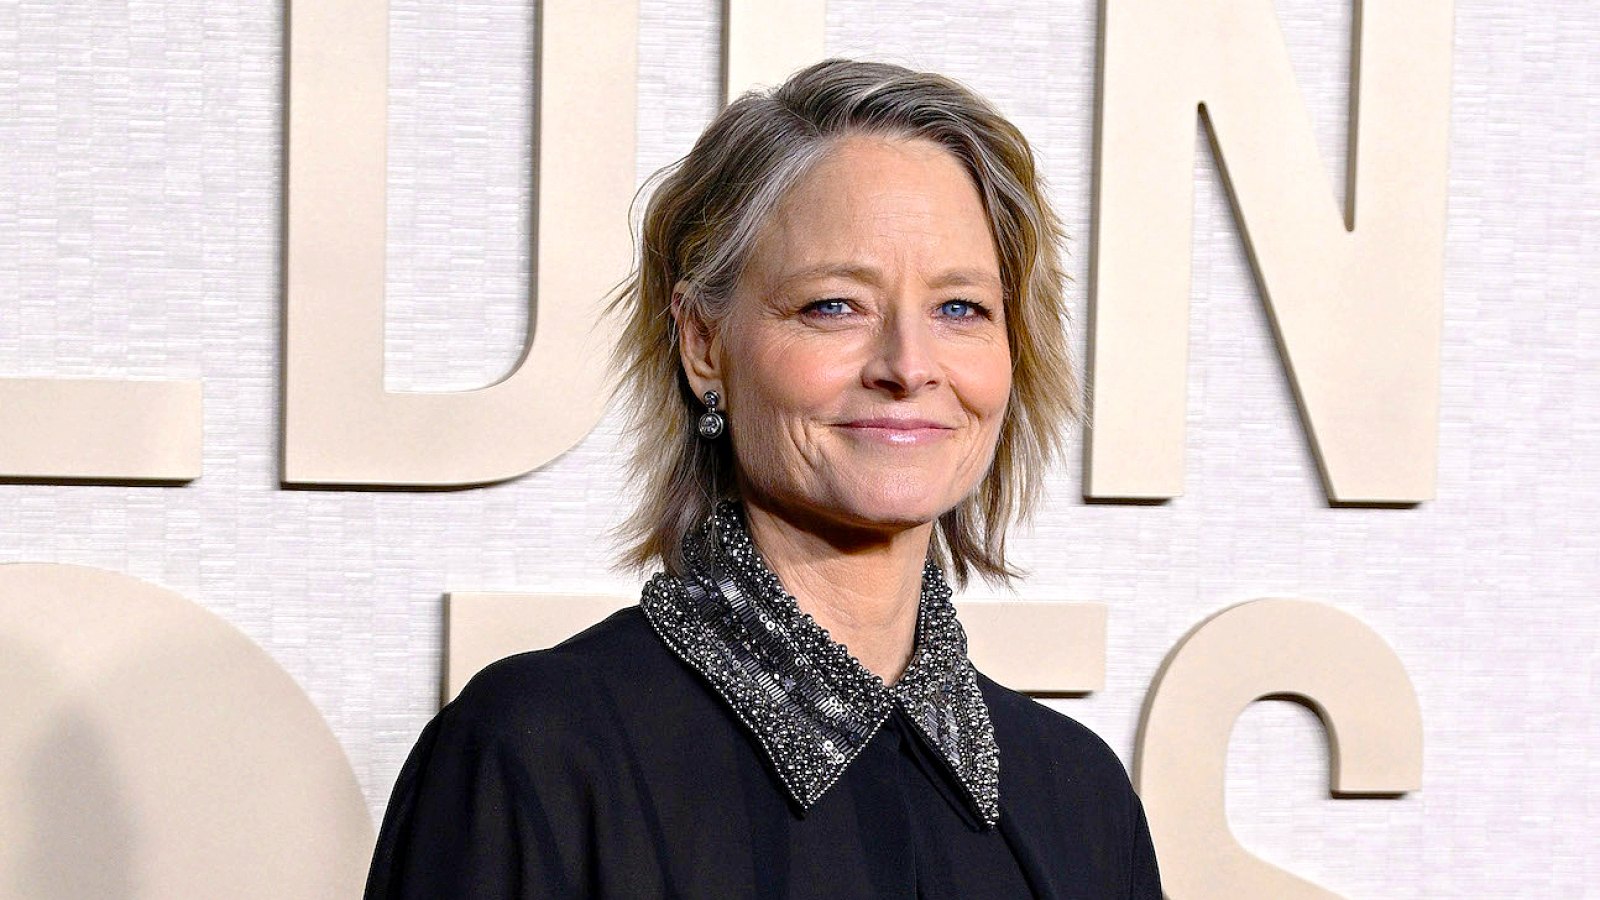 Jodie Foster Says Gen Z Are Annoying in the Workplace